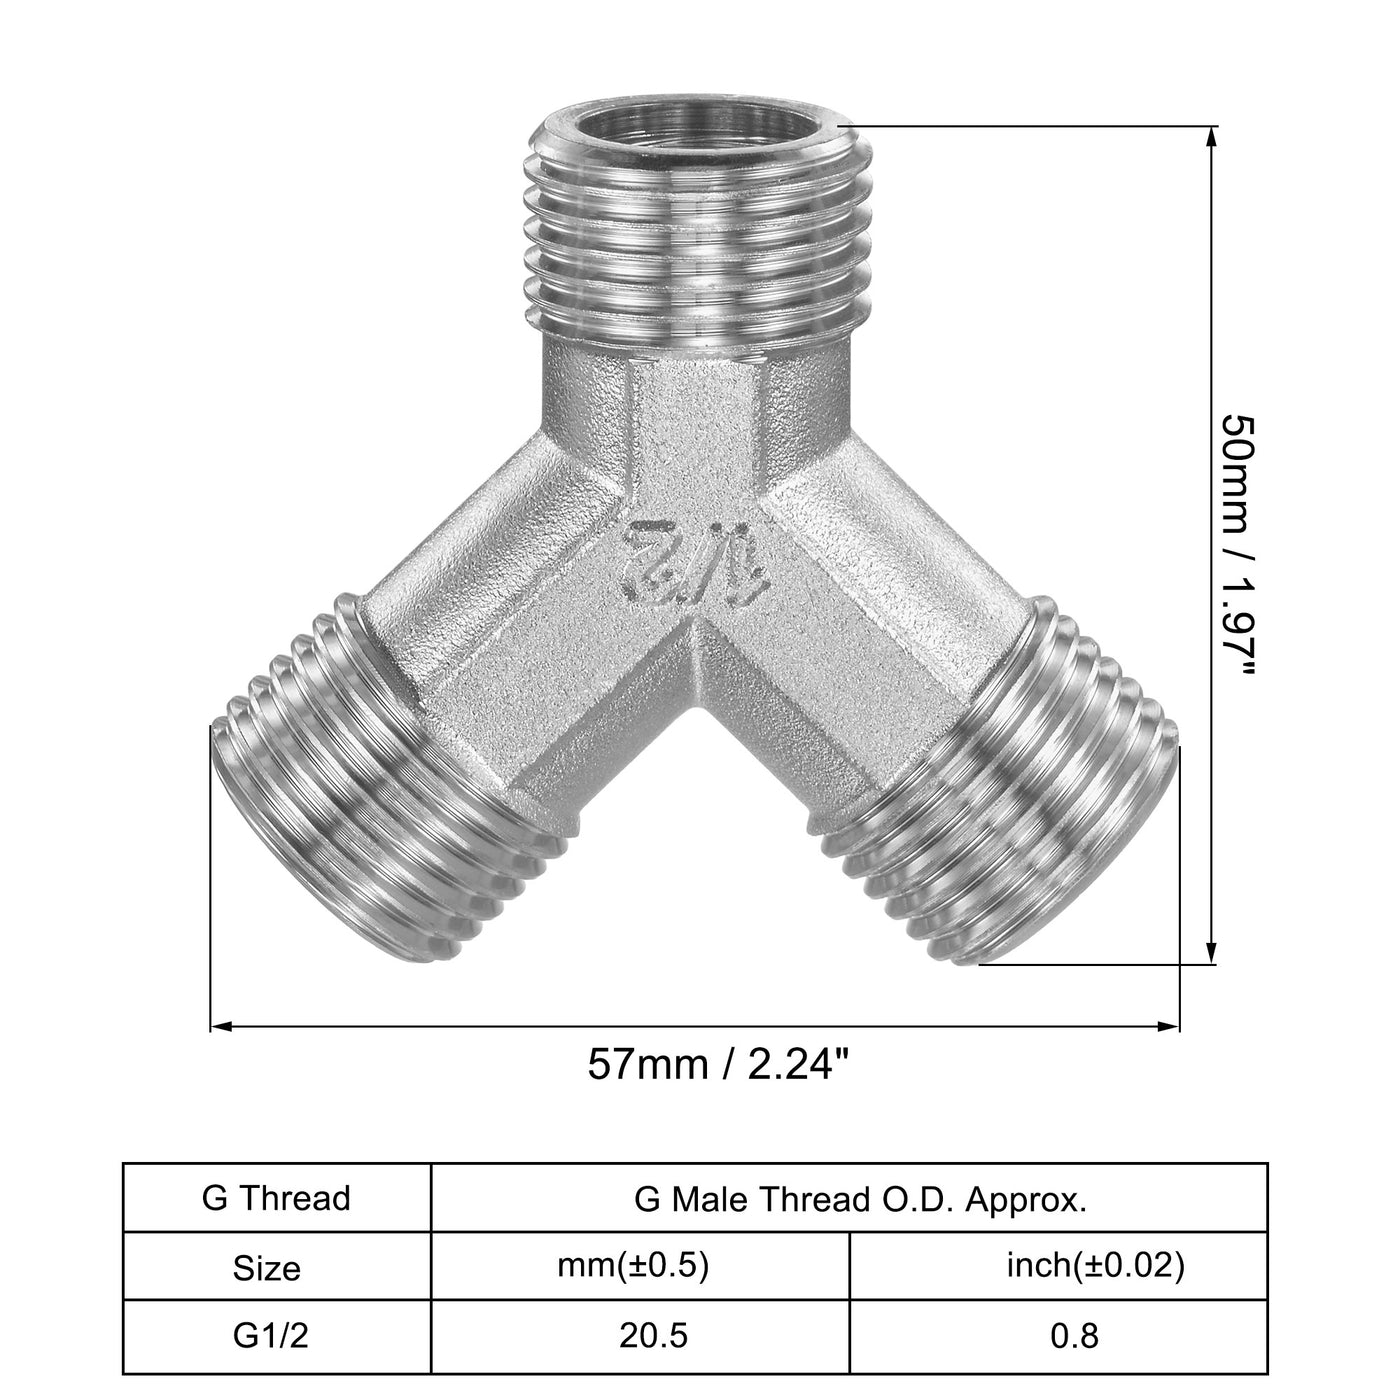 uxcell Uxcell Pipe Fitting G1/2 Male Thread Y Shape 3 Way Wye Hose Connector Adapter, Nickel-Plated Copper 2pcs